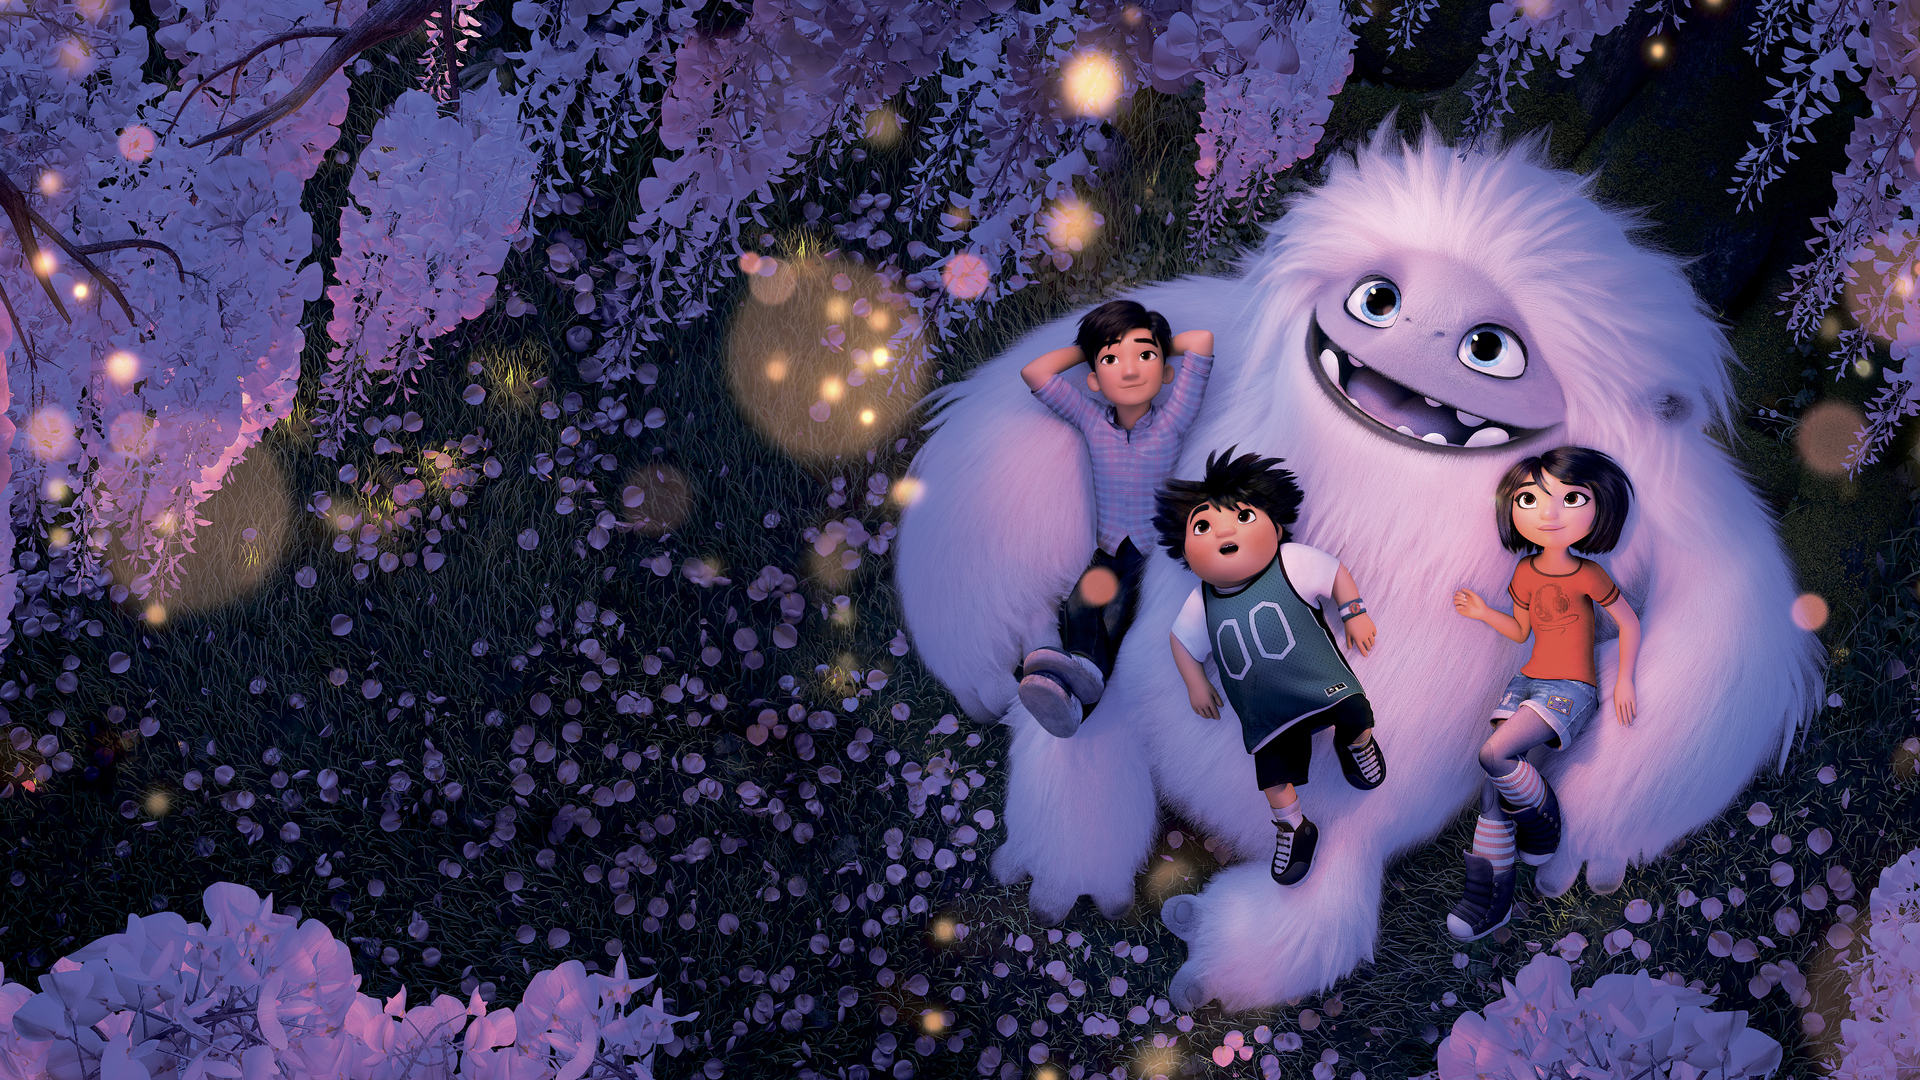 Animated Film Abominable Won't Be Released In Malaysia